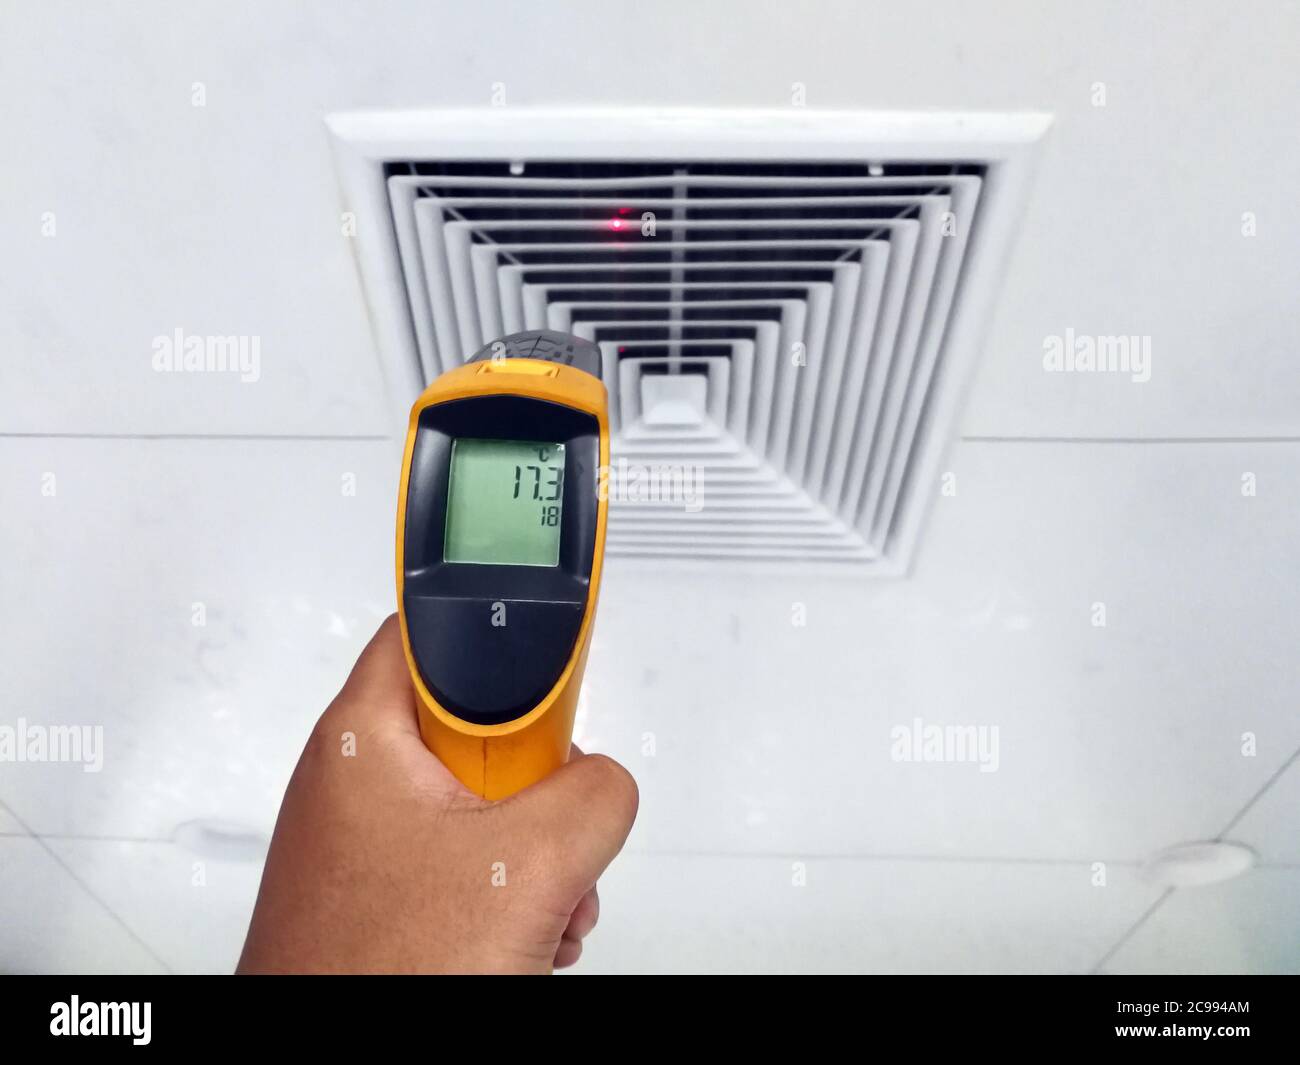 https://c8.alamy.com/comp/2C994AM/technicians-are-using-an-infrared-thermometer-to-check-the-temperature-of-the-air-supply-surface-2C994AM.jpg